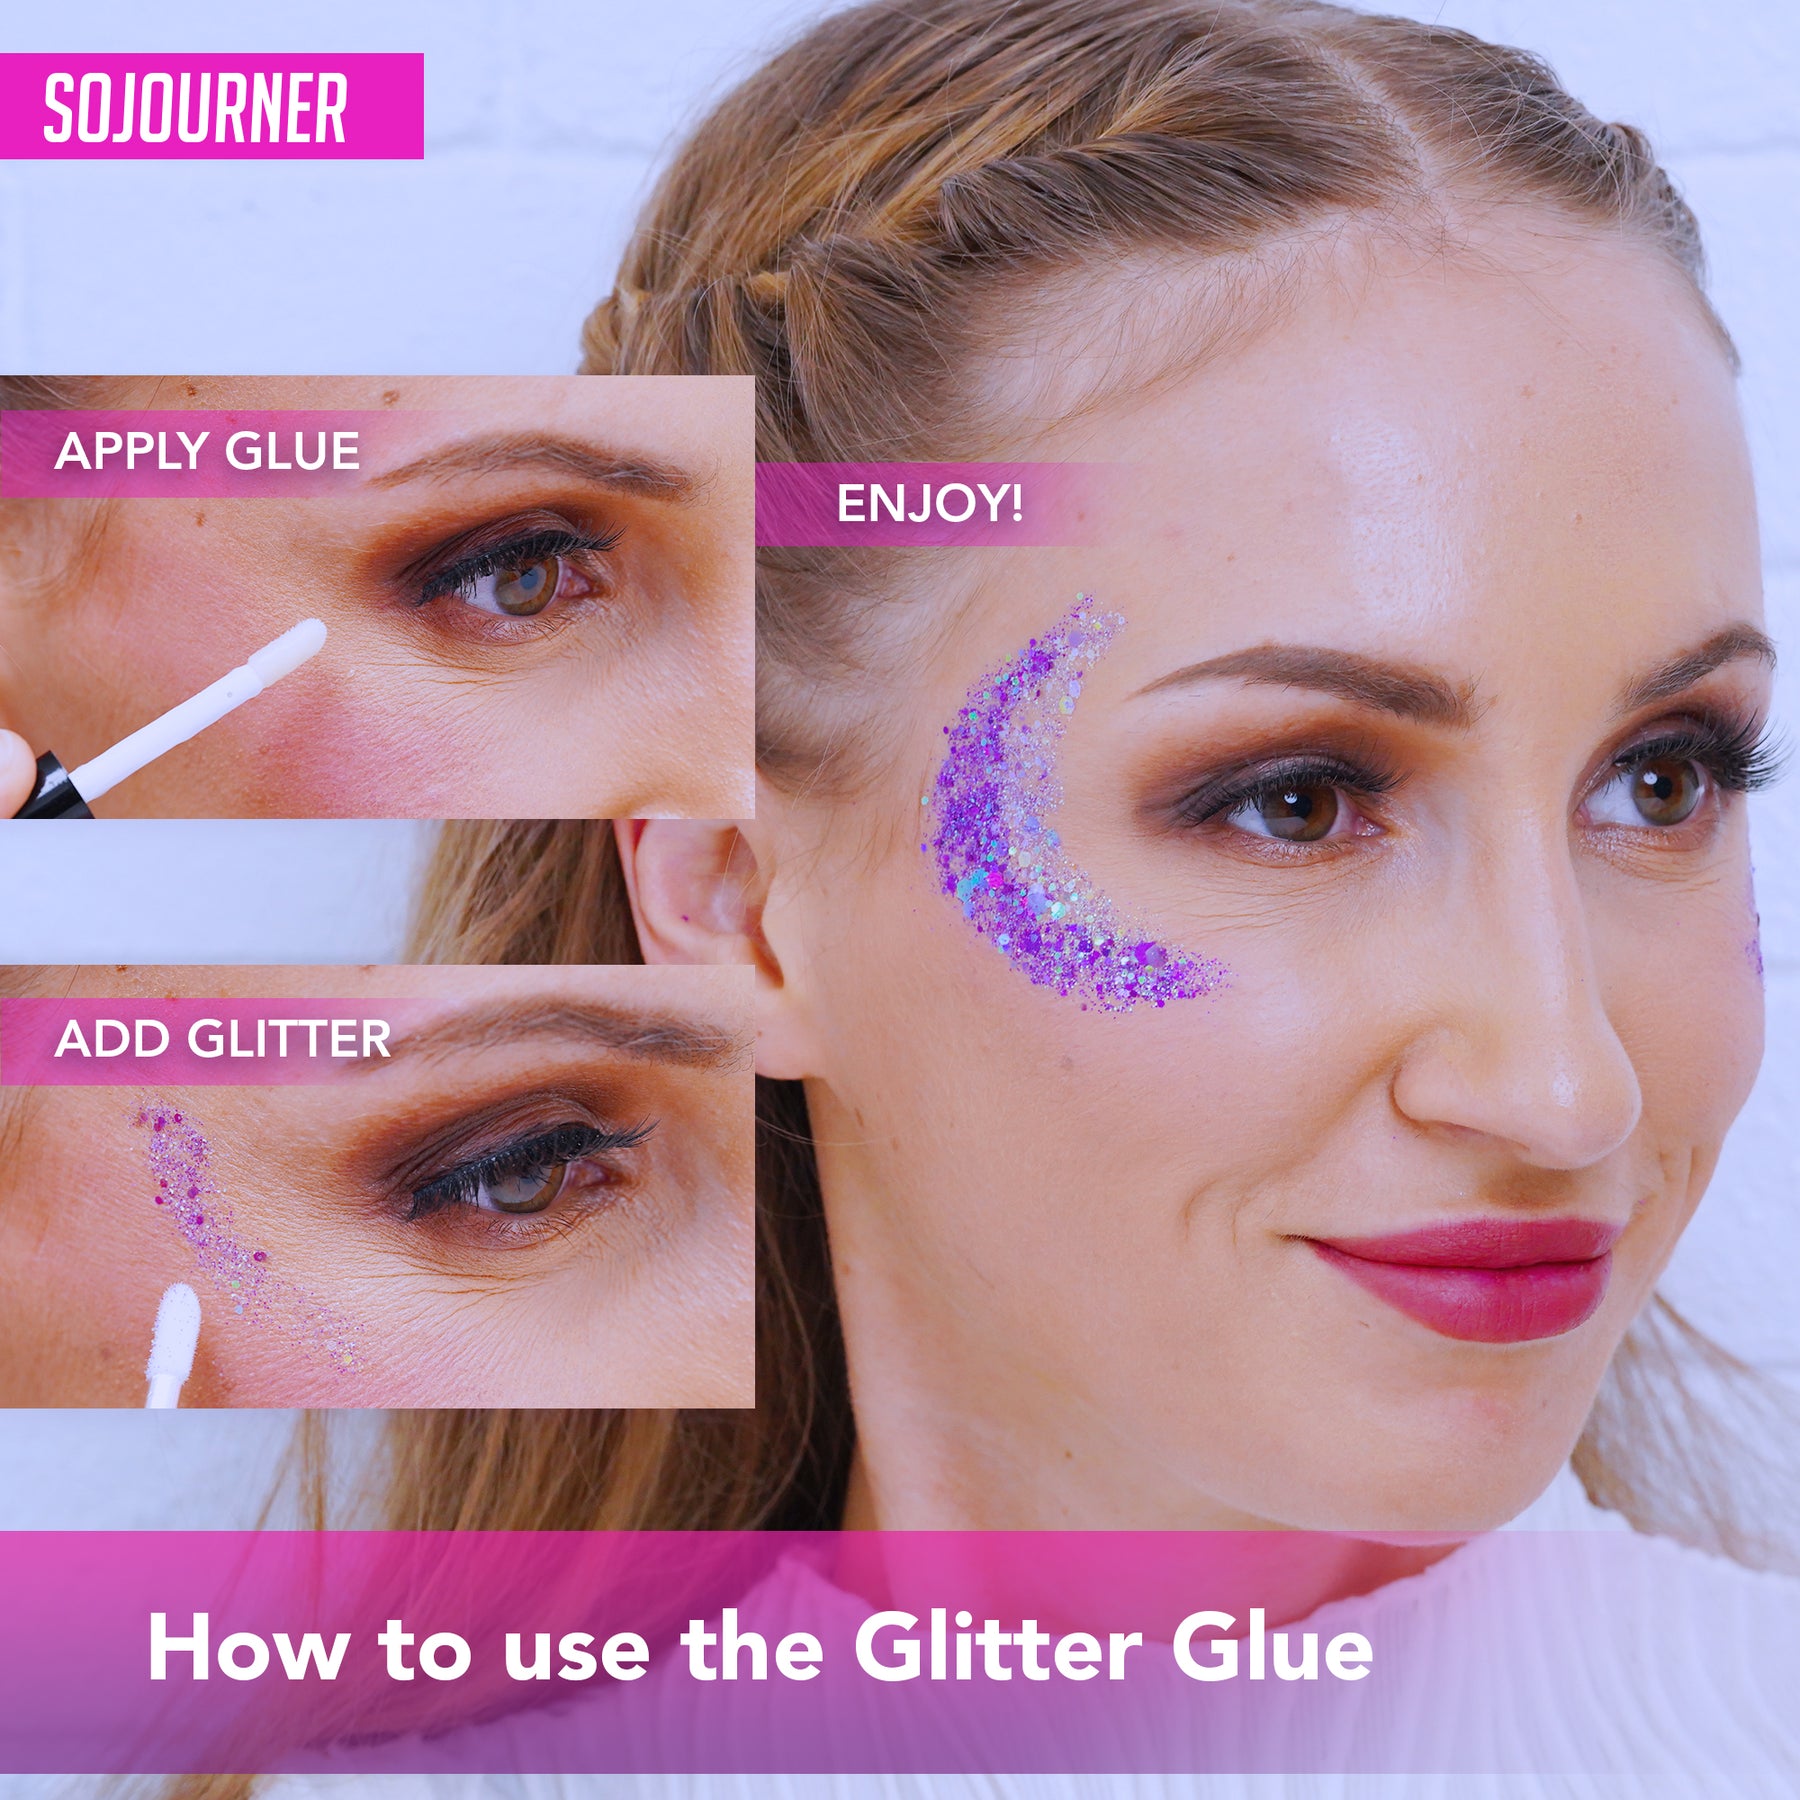 Glitter Body Glue & Face Glue - Face Glitter Makeup Primer for Eye, Face,  Skin, Body Adhesive & More | Use with Glitter, Body Jewels, Rhinestones